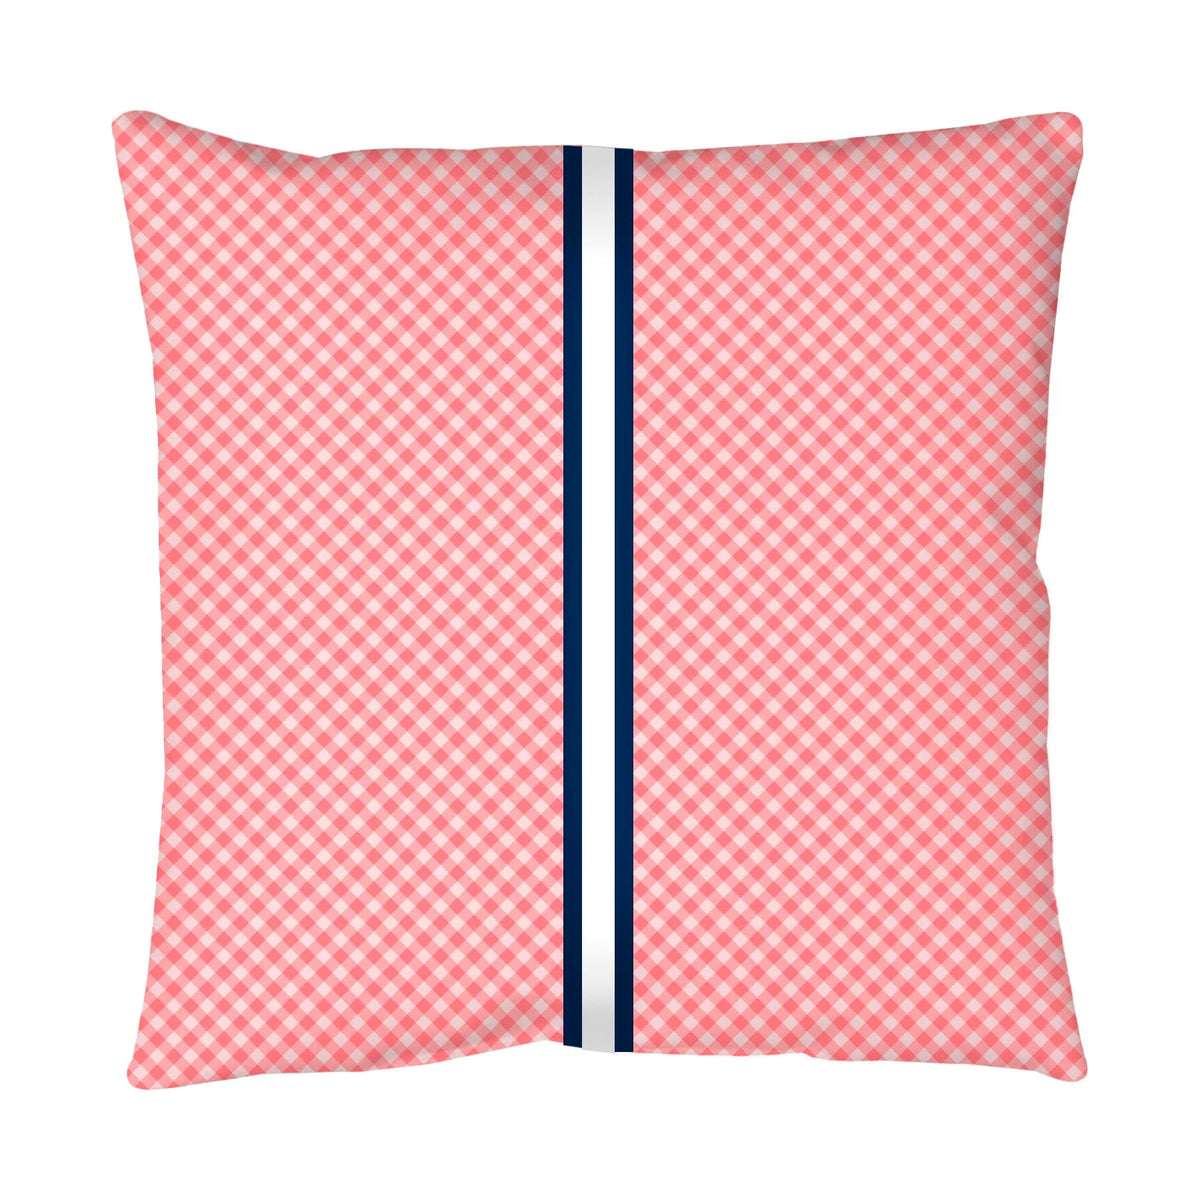 Euro/Floor Pillow - Gingham Red Bedding Collections, Pillows, Floor Pillows MWW 